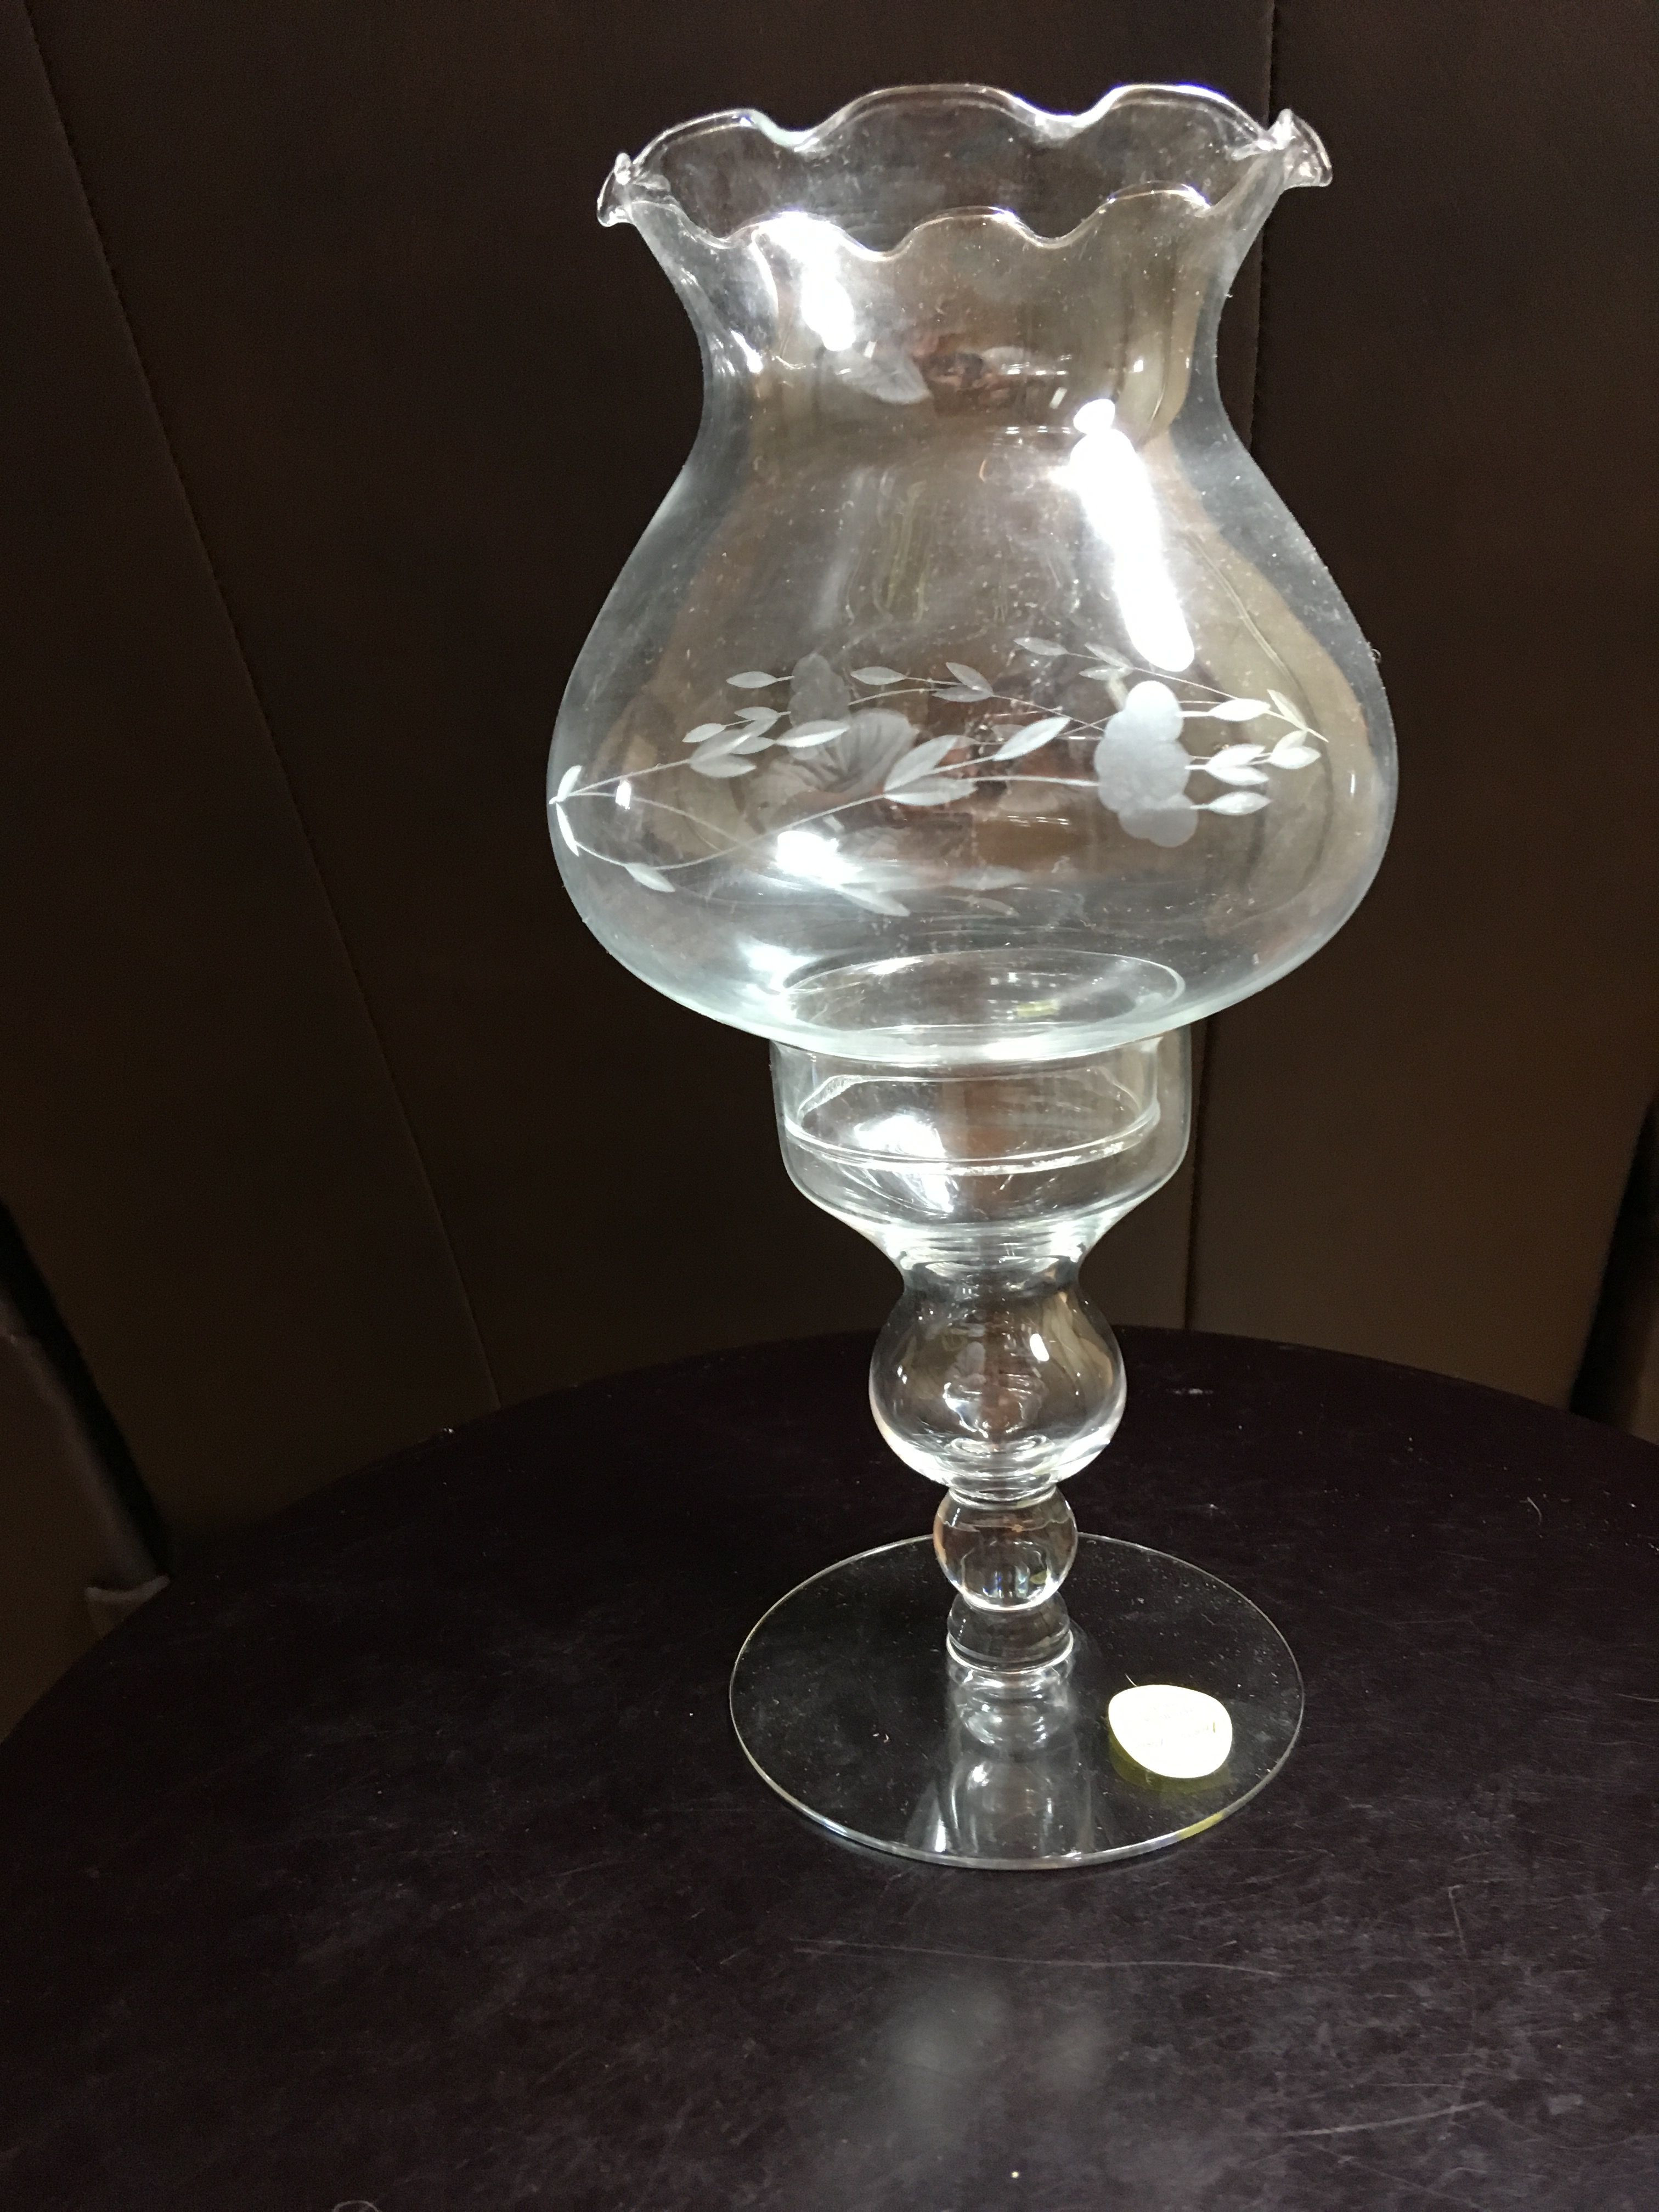 19 Ideal 24 Inch Tall Glass Vases 2024 free download 24 inch tall glass vases of princess house glass candle lamp in box candle lamp princess regarding princess house glass candle lamp holder still in box approx measures 9 25 inch overall heig